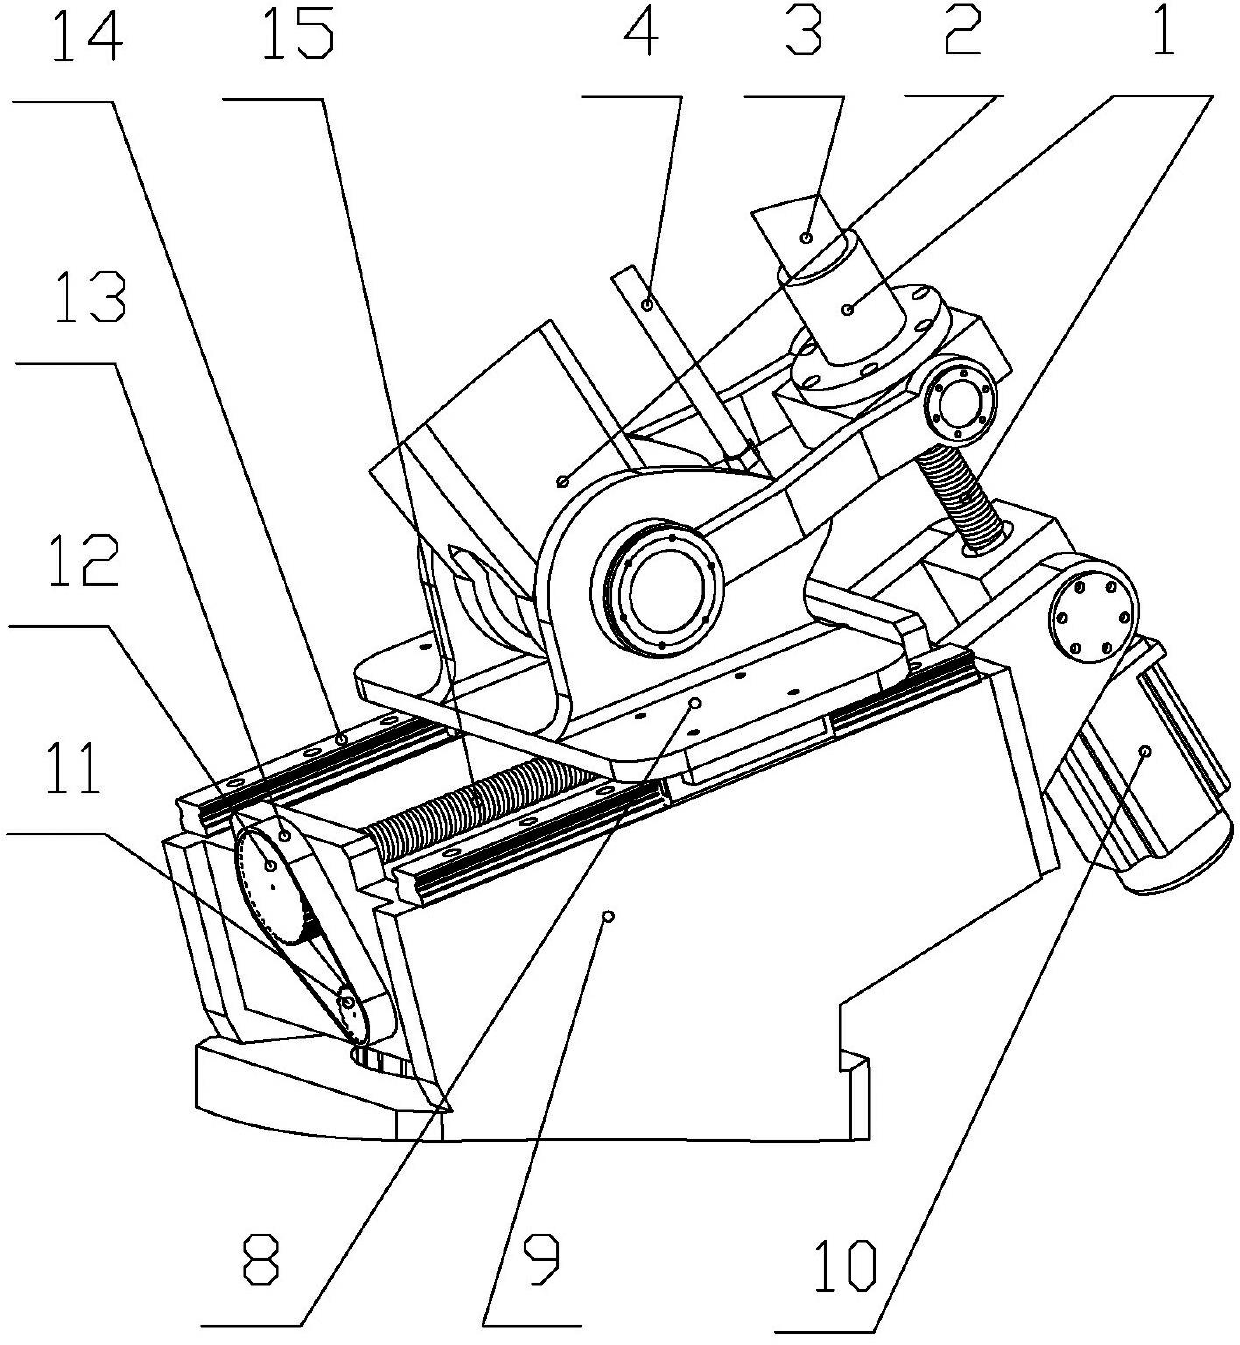 Robot palletizer for carrying